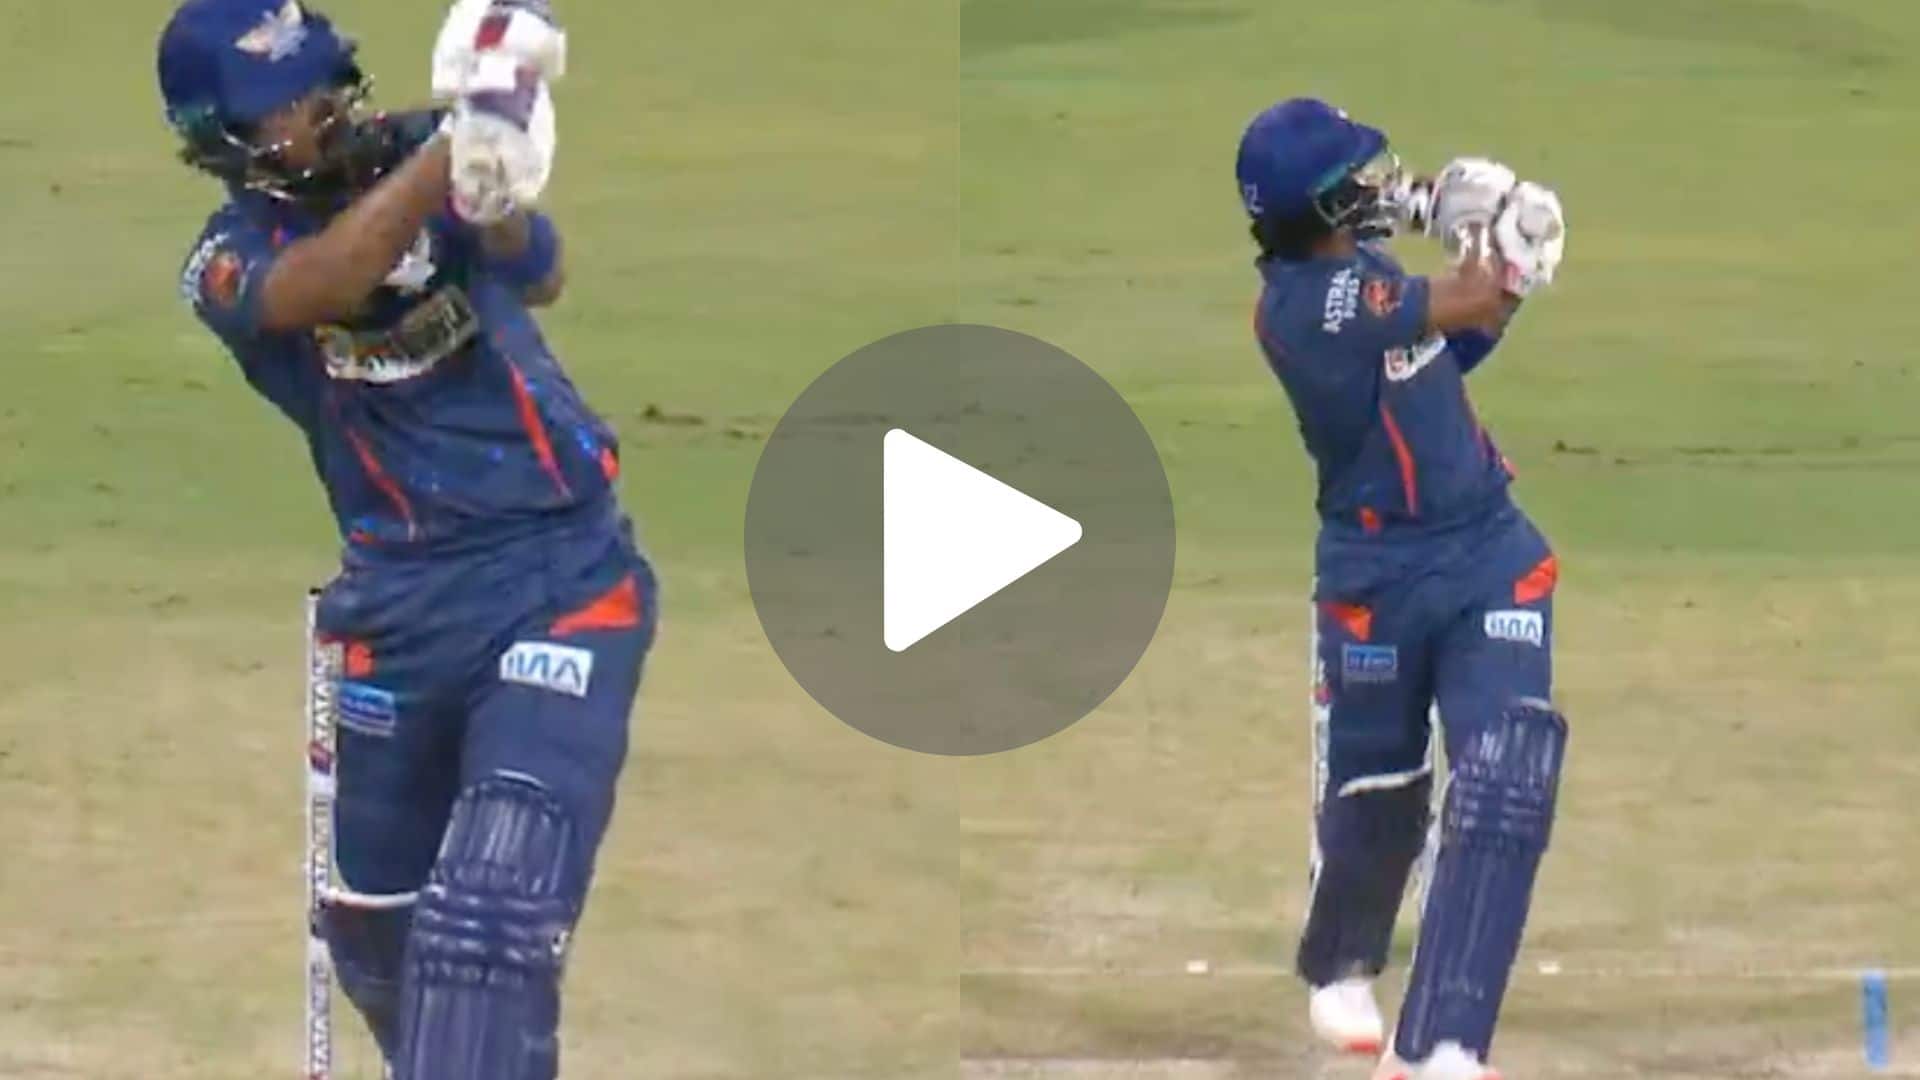 [Watch] KL Rahul Mauls Avesh Khan For 2 Huge Maximums During His Blistering Knock